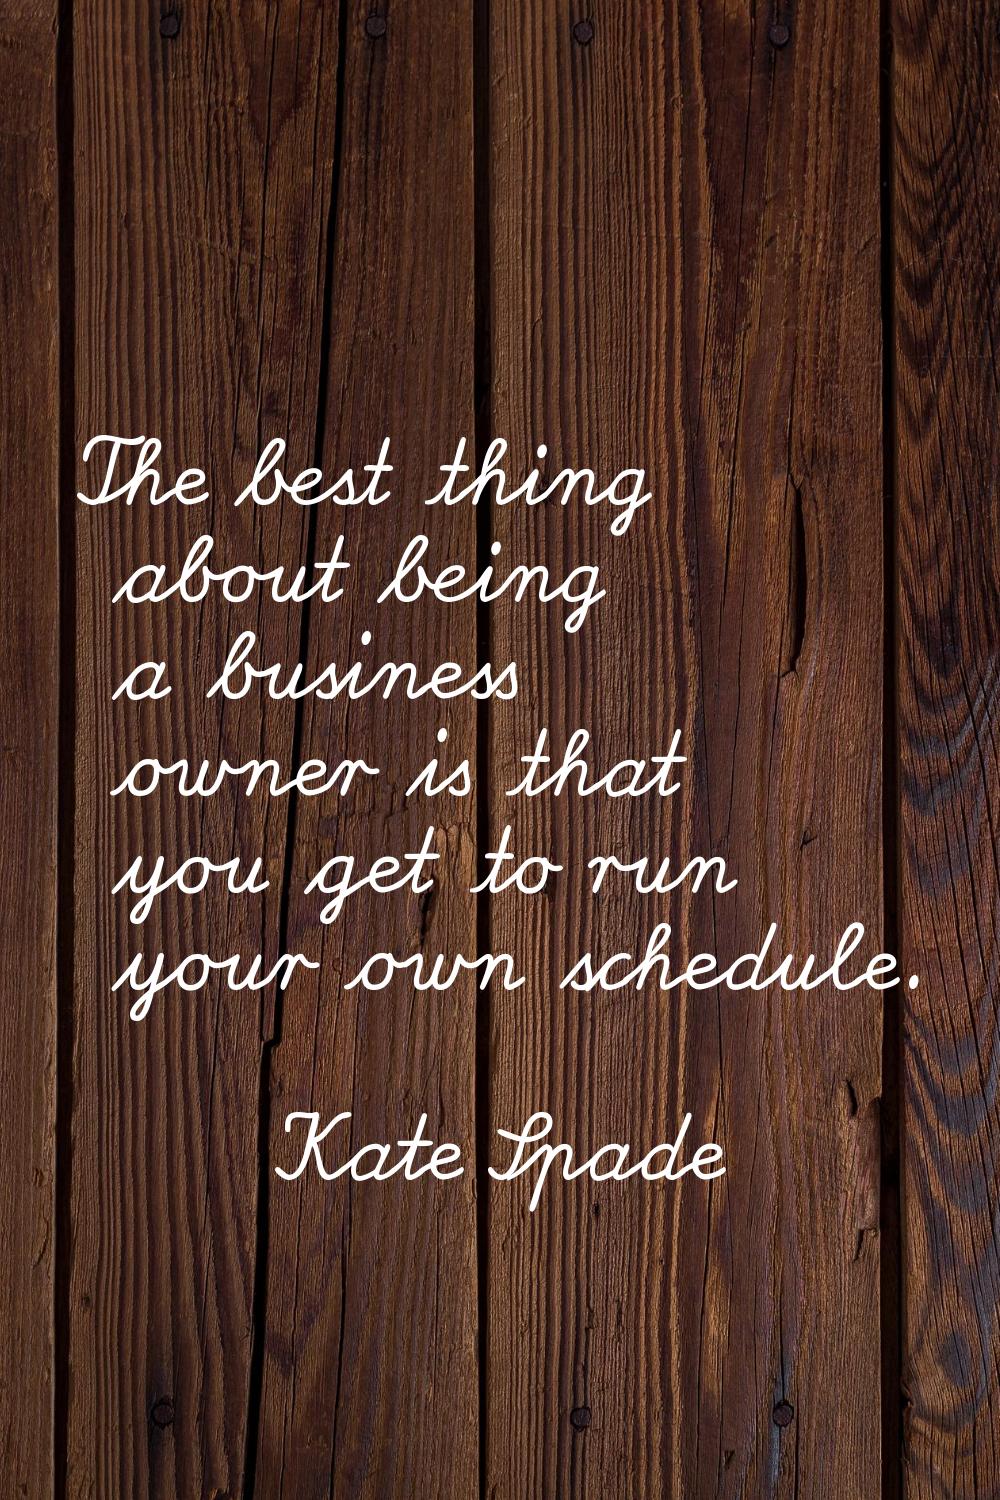 The best thing about being a business owner is that you get to run your own schedule.